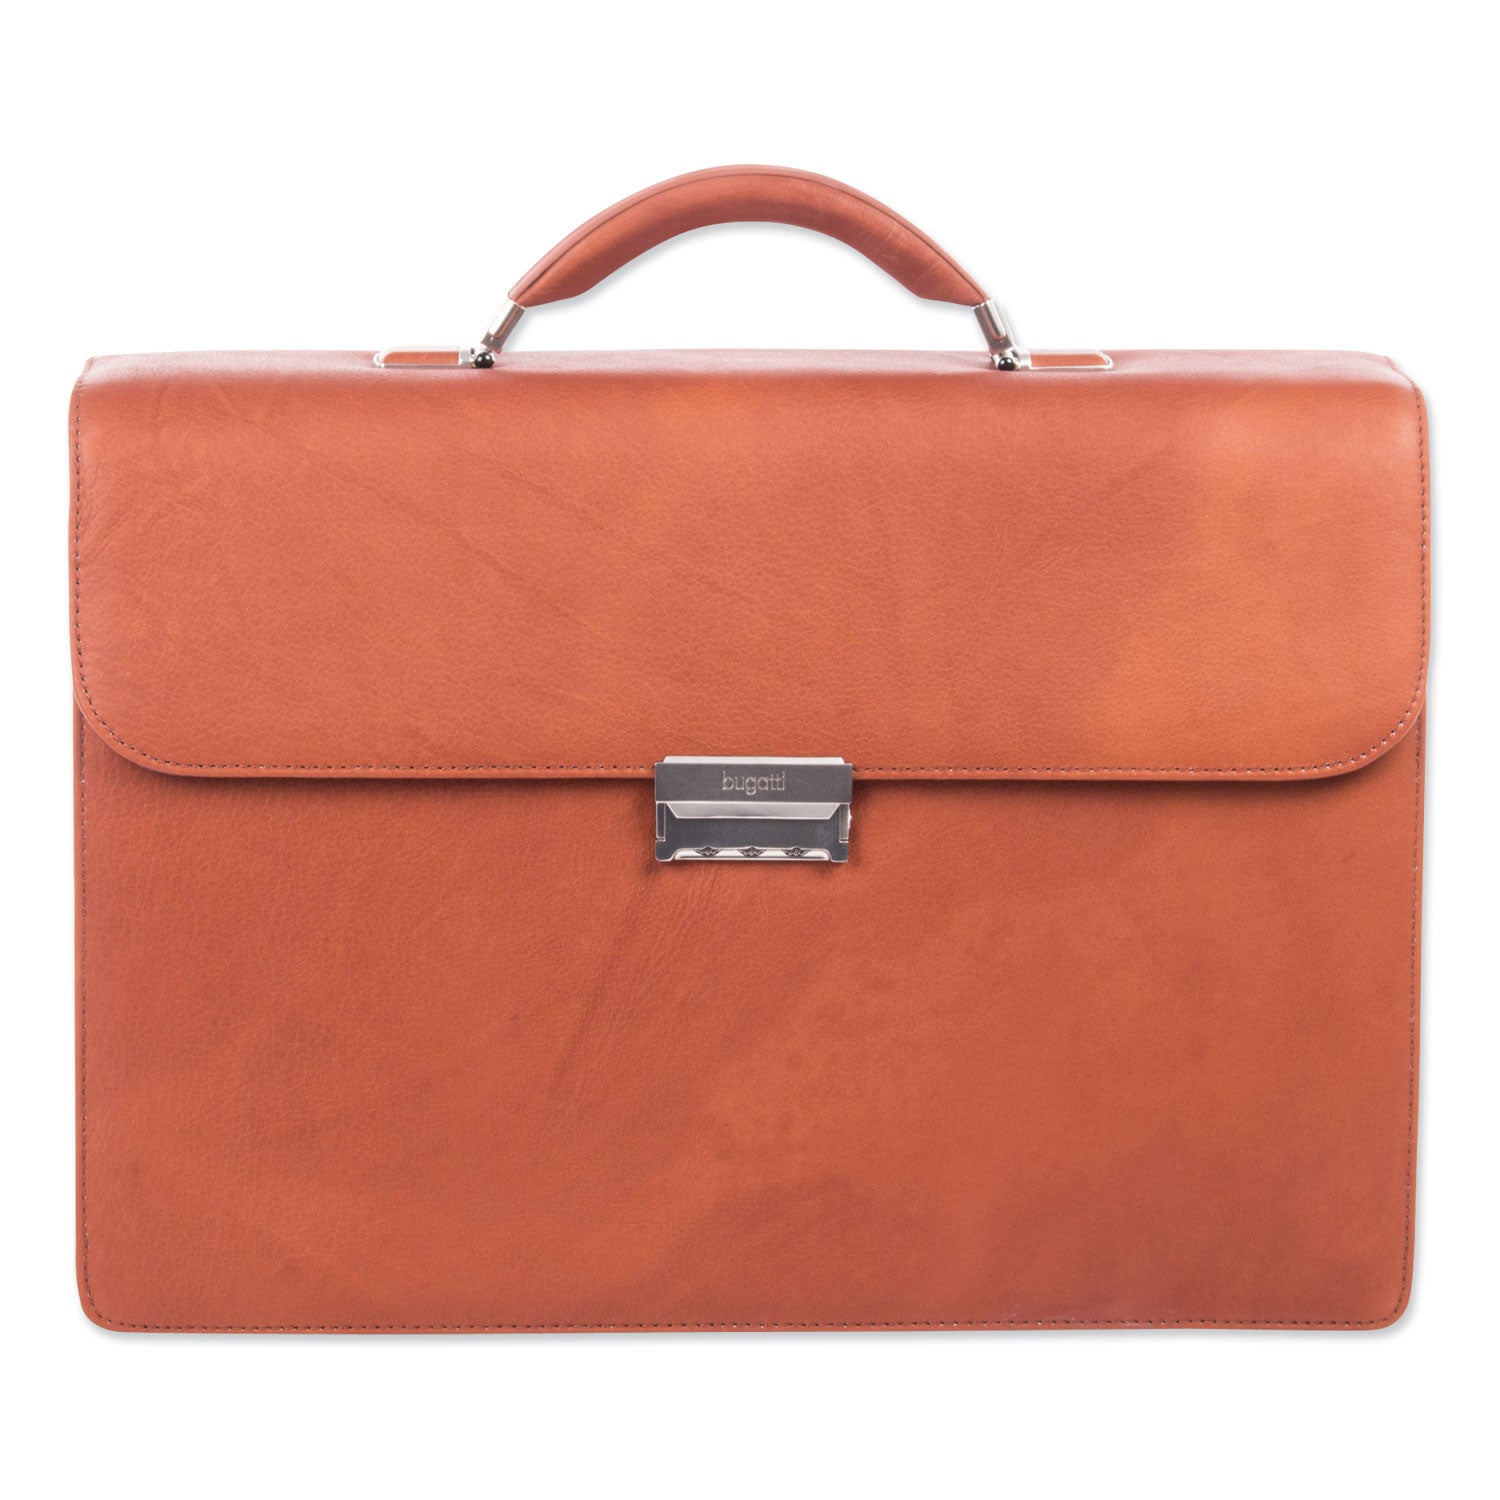 milestone-briefcase-fits-devices-up-to-156-leather-5-x-5-x-12-cognac_swz49545807sm - 2